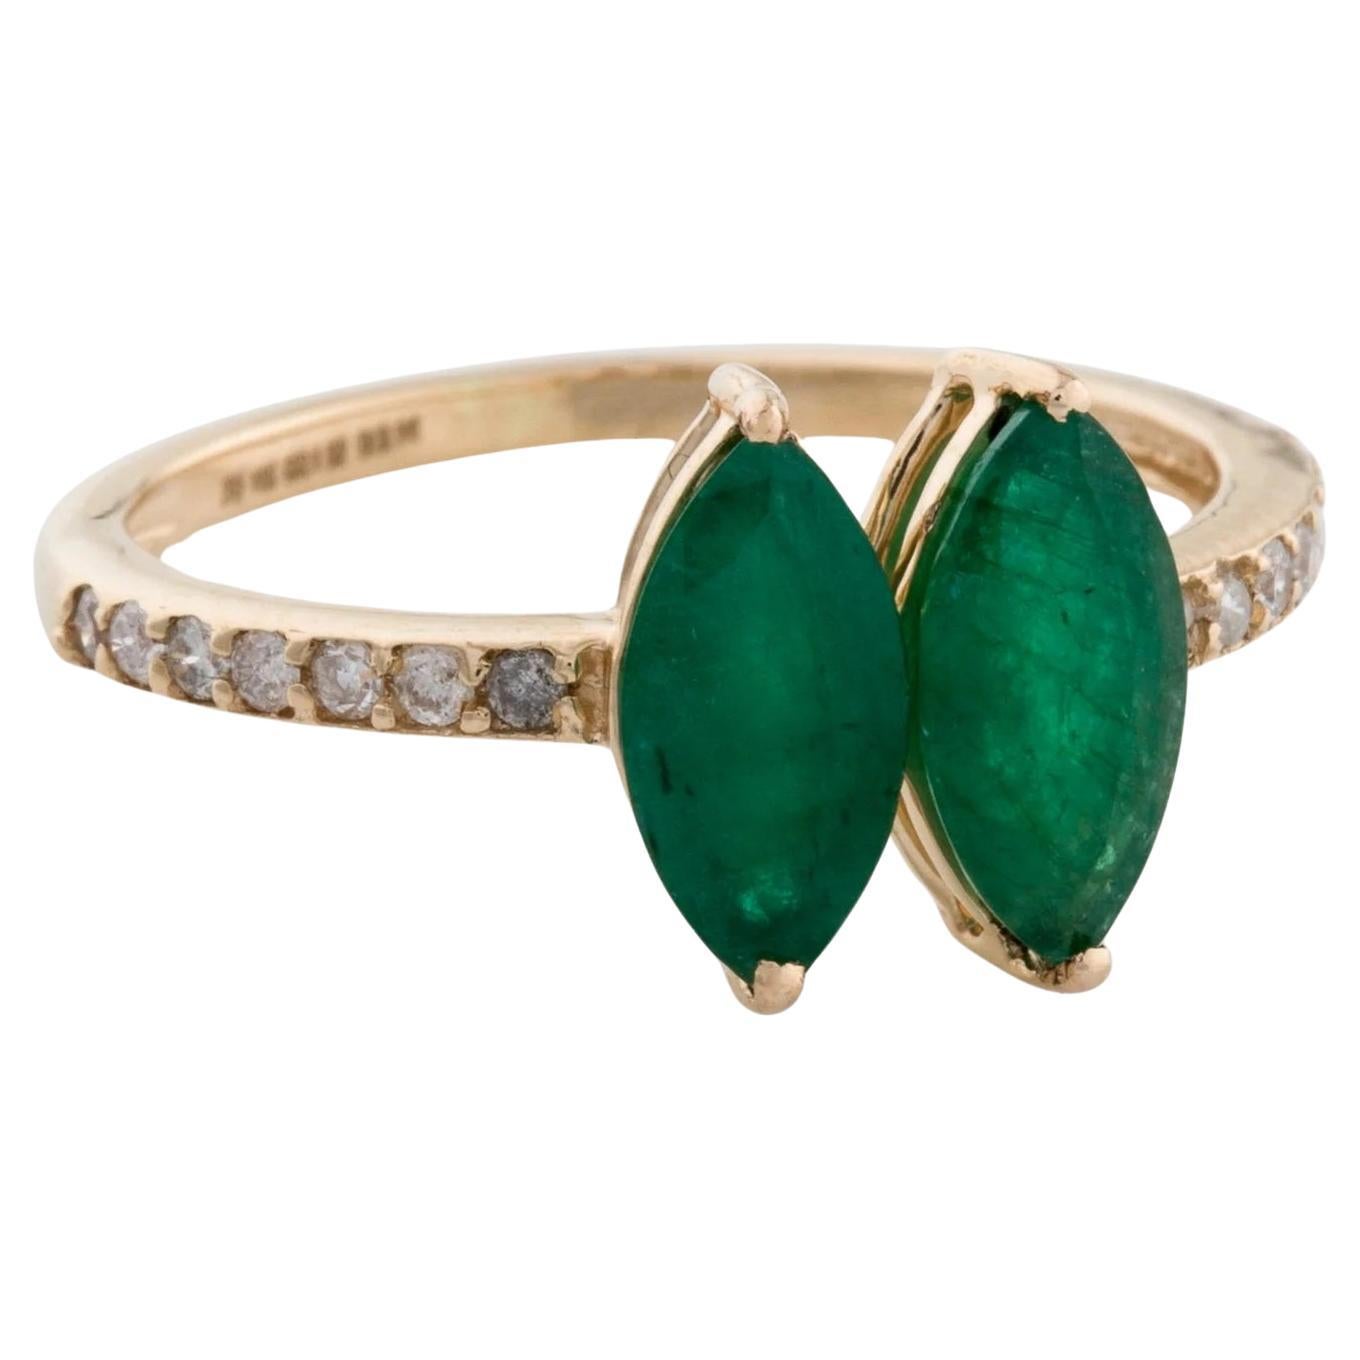 14K Yellow Gold 1.52ctw Emerald & Diamond Cocktail Ring Size 6.5